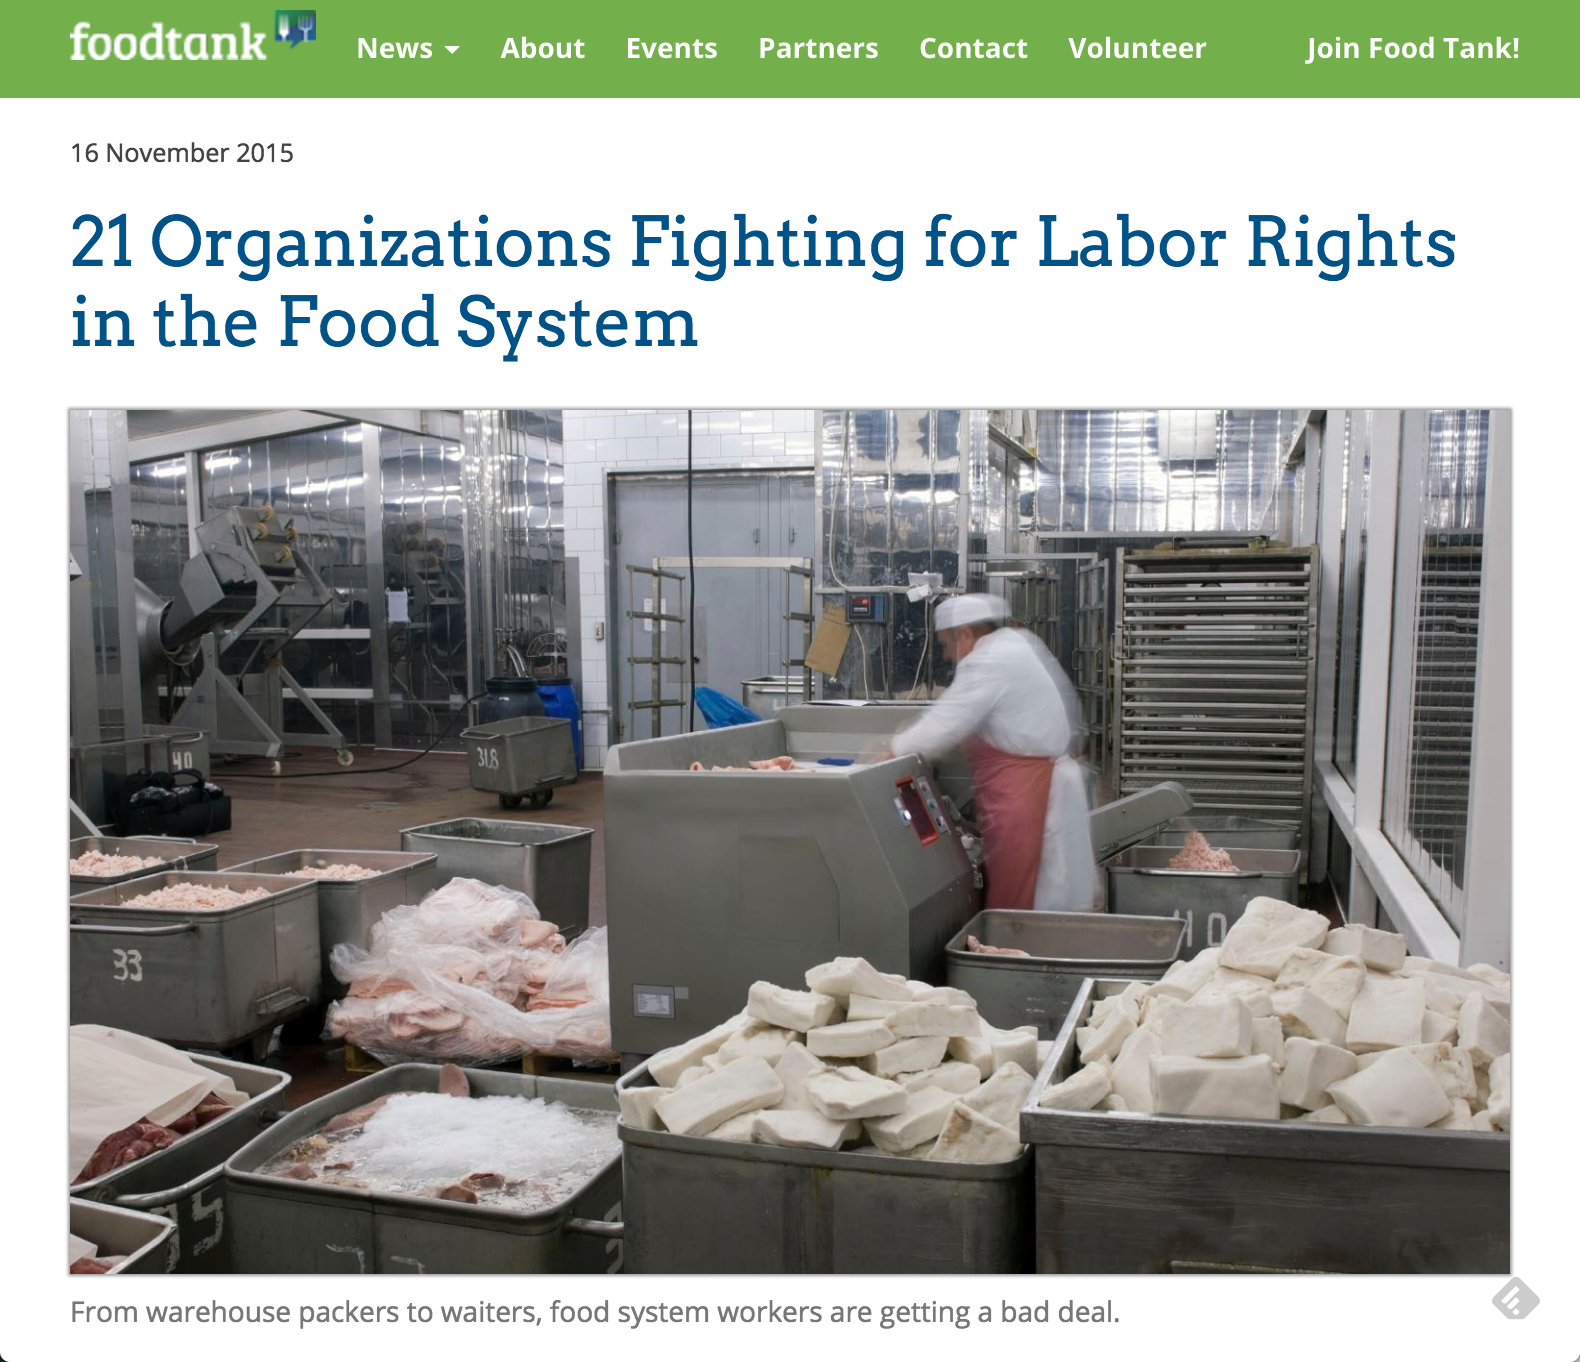 Food Tank: 21 Organizations Fighting for Labor Rights in the Food System